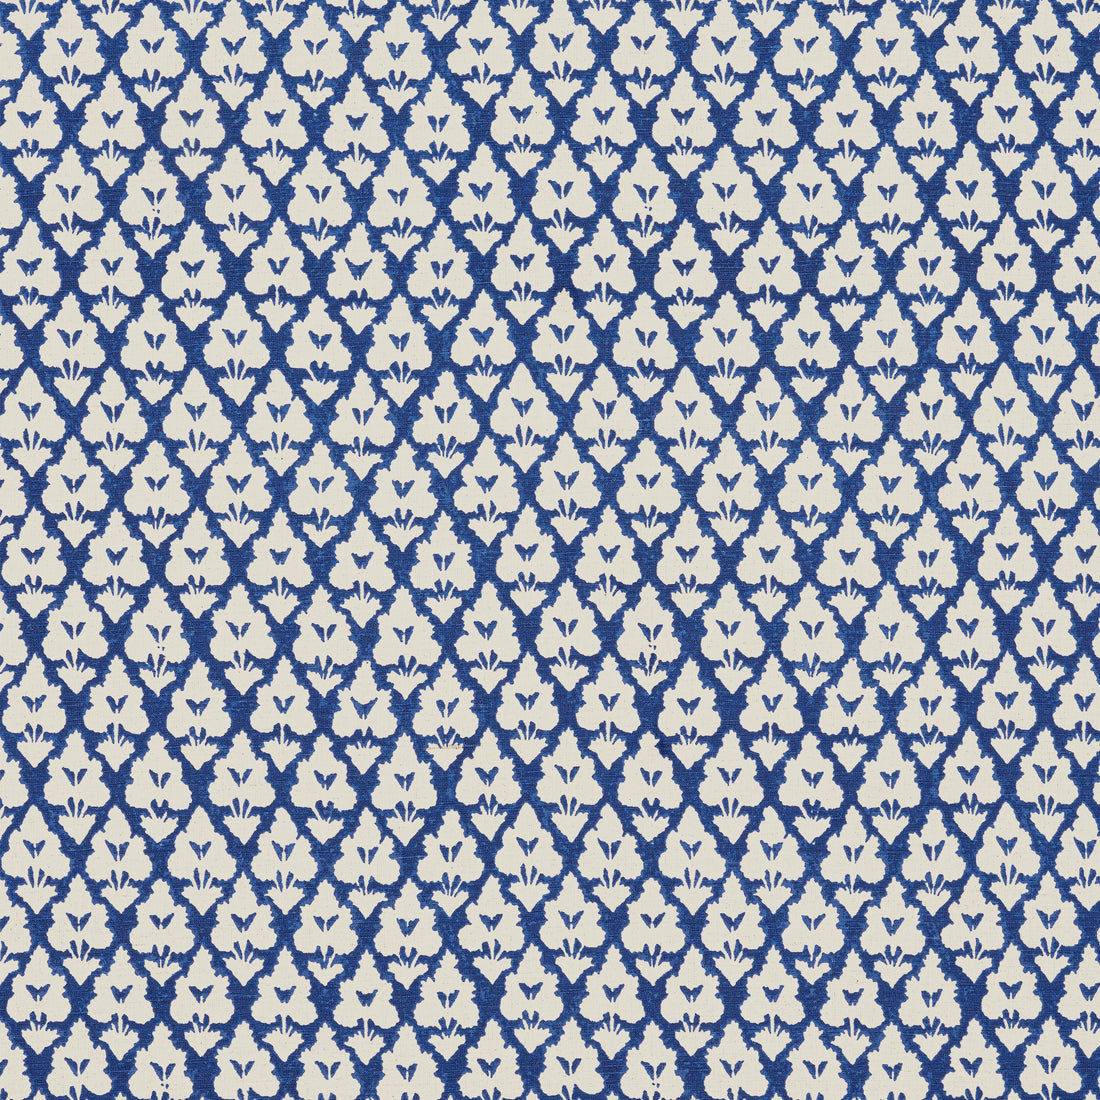 Arboreta fabric in navy color - pattern number F910833 - by Thibaut in the Heritage collection